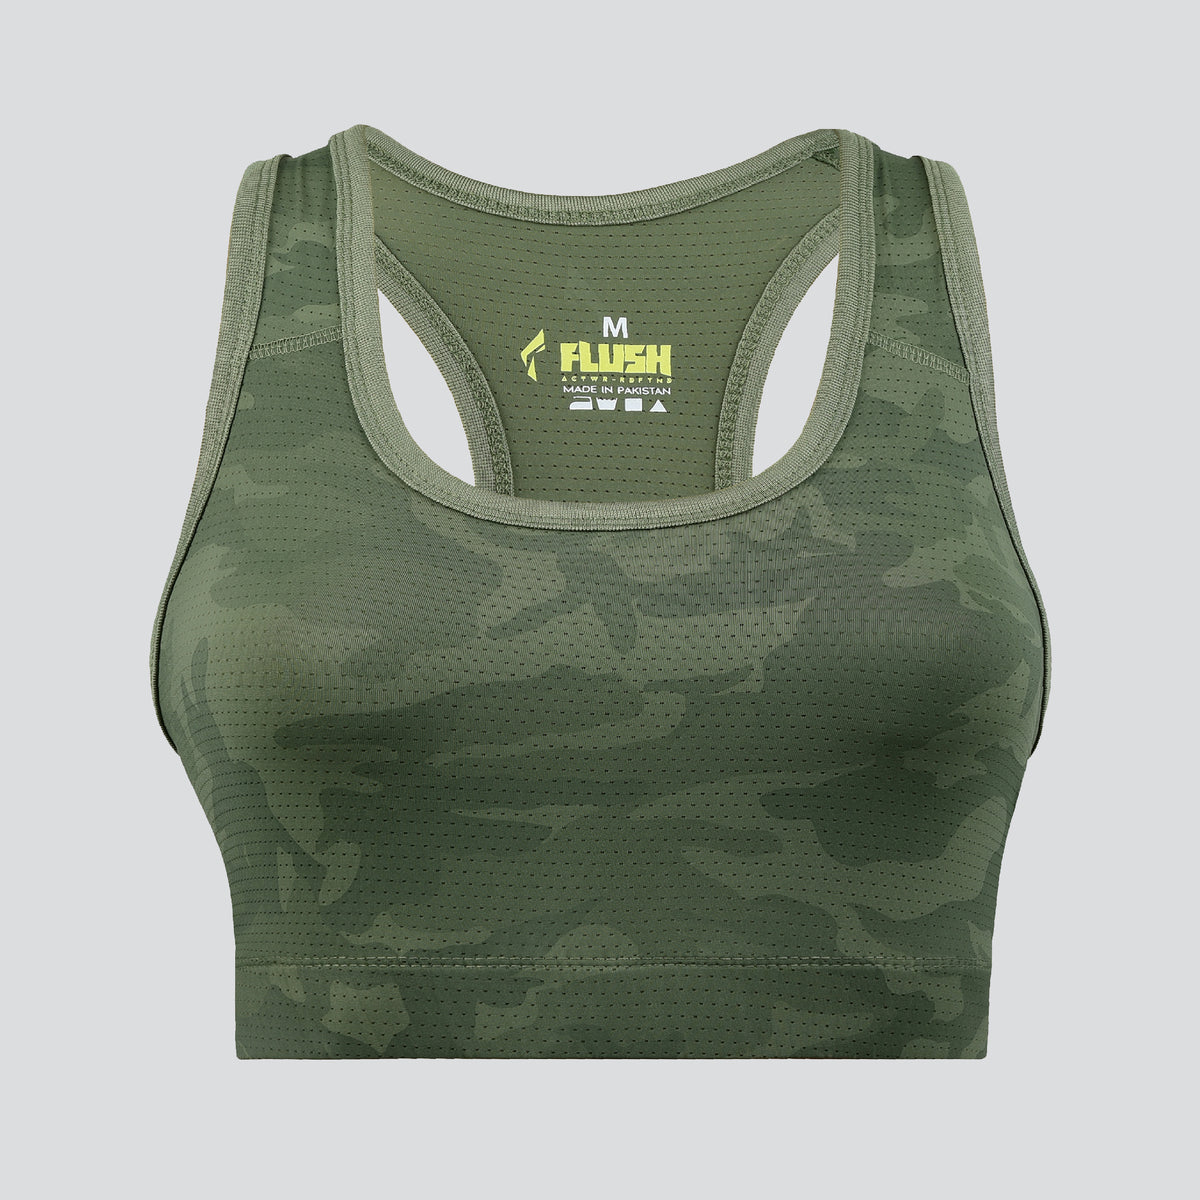 Women's Camo Sports Bra, Support for Yoga Gym - Lime Green